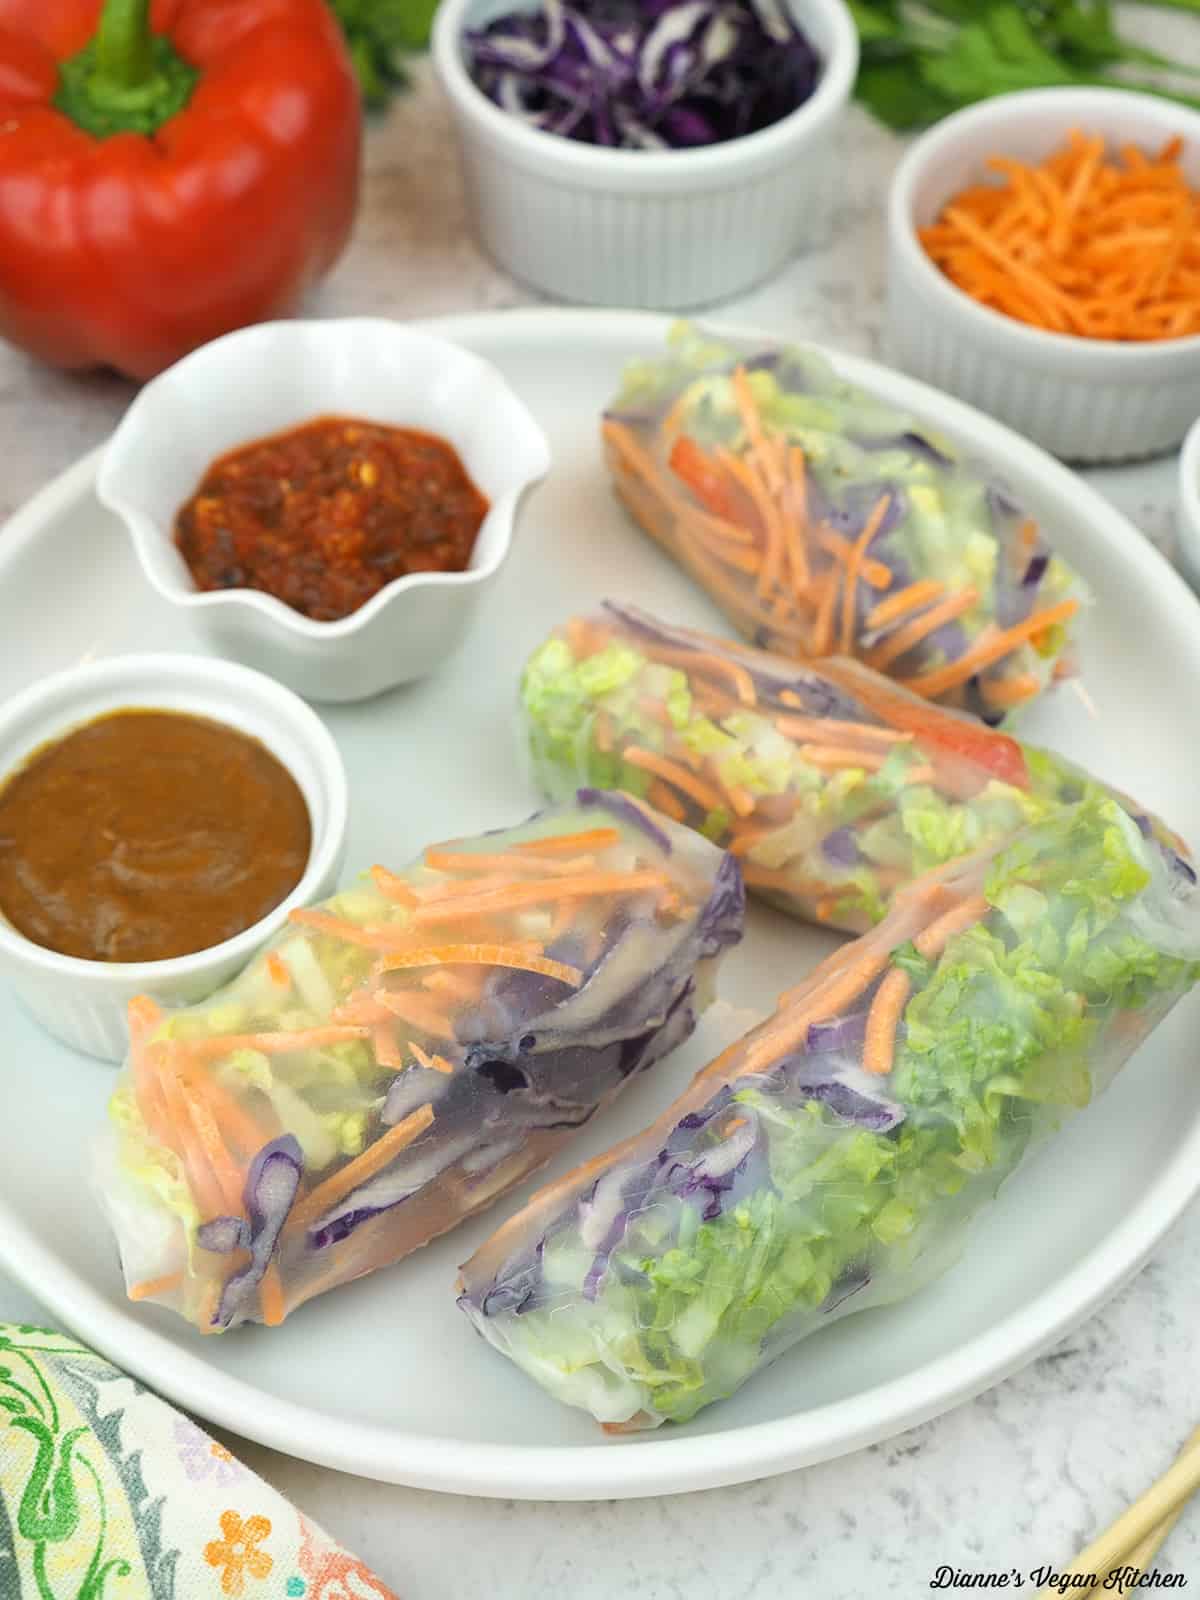 plate with spring rolls, peanut sauce, and chili sauce